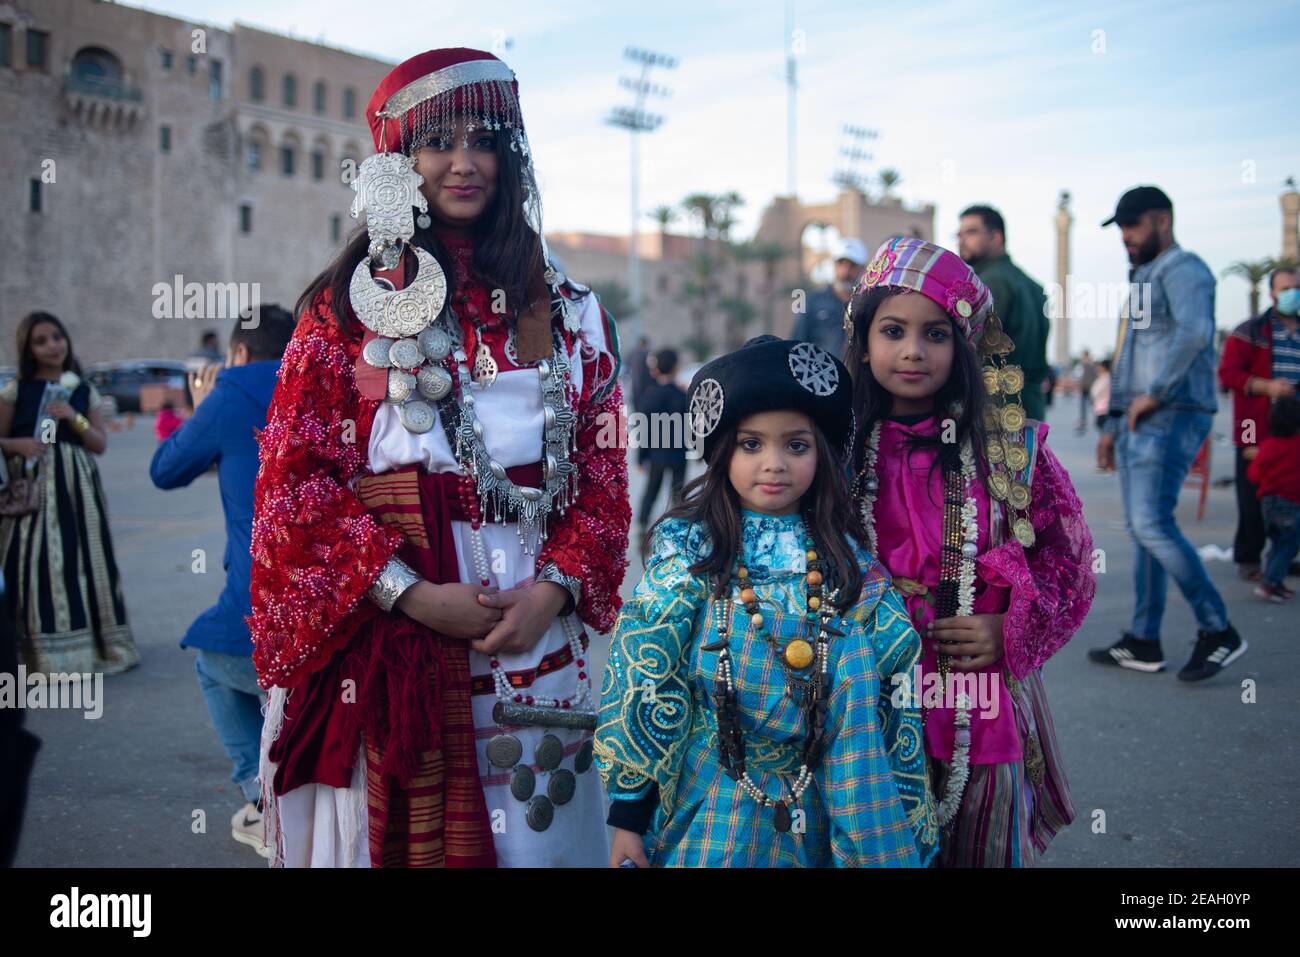 Tripoli. 4th Feb, 2021. Libyan girls in traditional dresses pose for a photo at the Martyr's Square in Tripoli, Libya on Feb. 4, 2021. As the 10th anniversary of the Libyan uprising that toppled late leader Muammar Gaddafi's regime approaches, Libyan analysts believe the war-torn country is facing a real chance for restoring political stability, especially with the recent creation of a new executive authority. Credit: Nada Harib/Xinhua/Alamy Live News Stock Photo